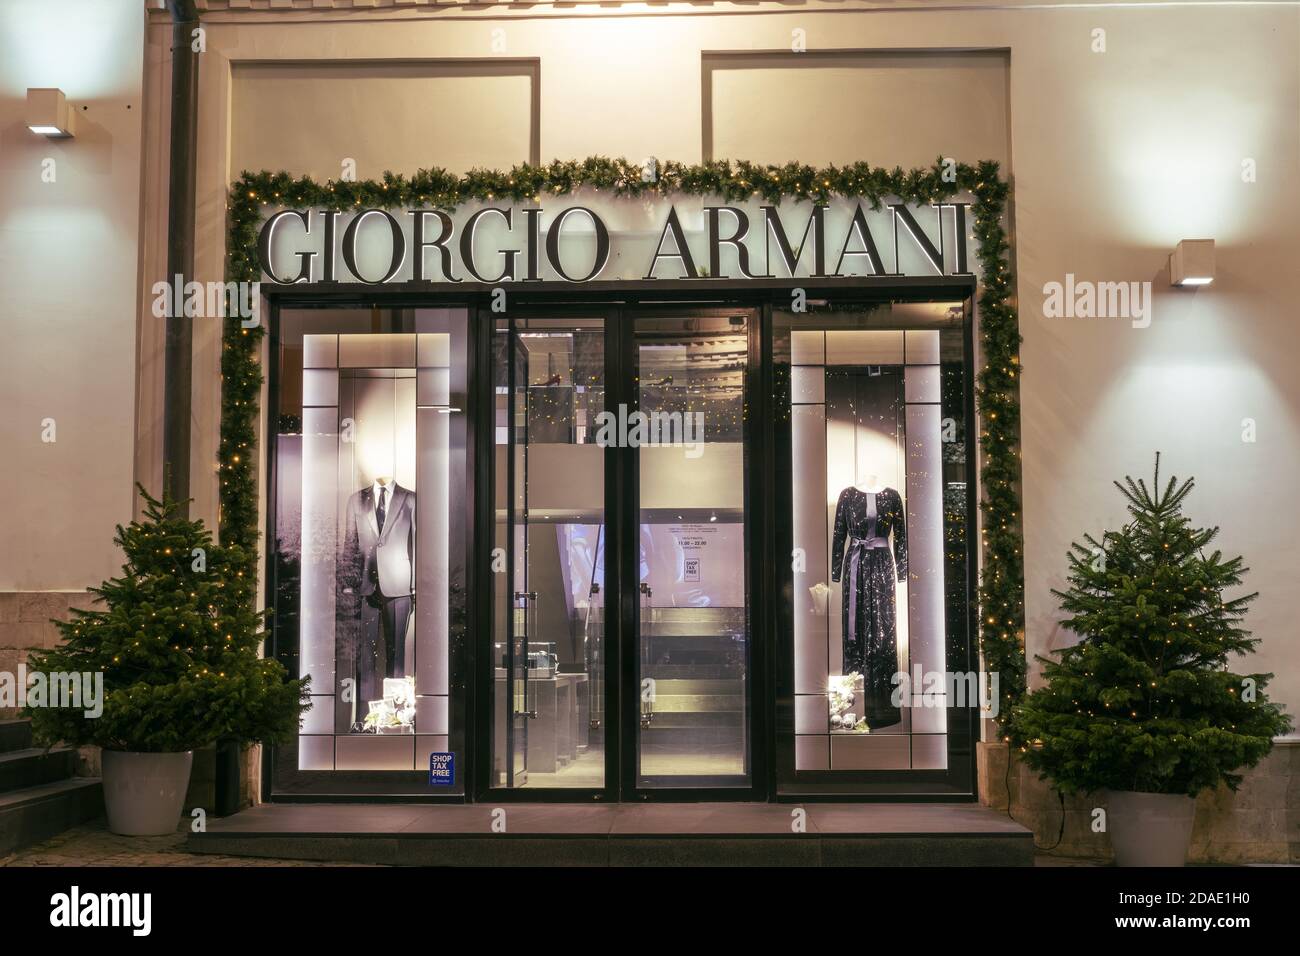 Giorgio Armani's Christmas store with mannequins in clothes. Entrance ...